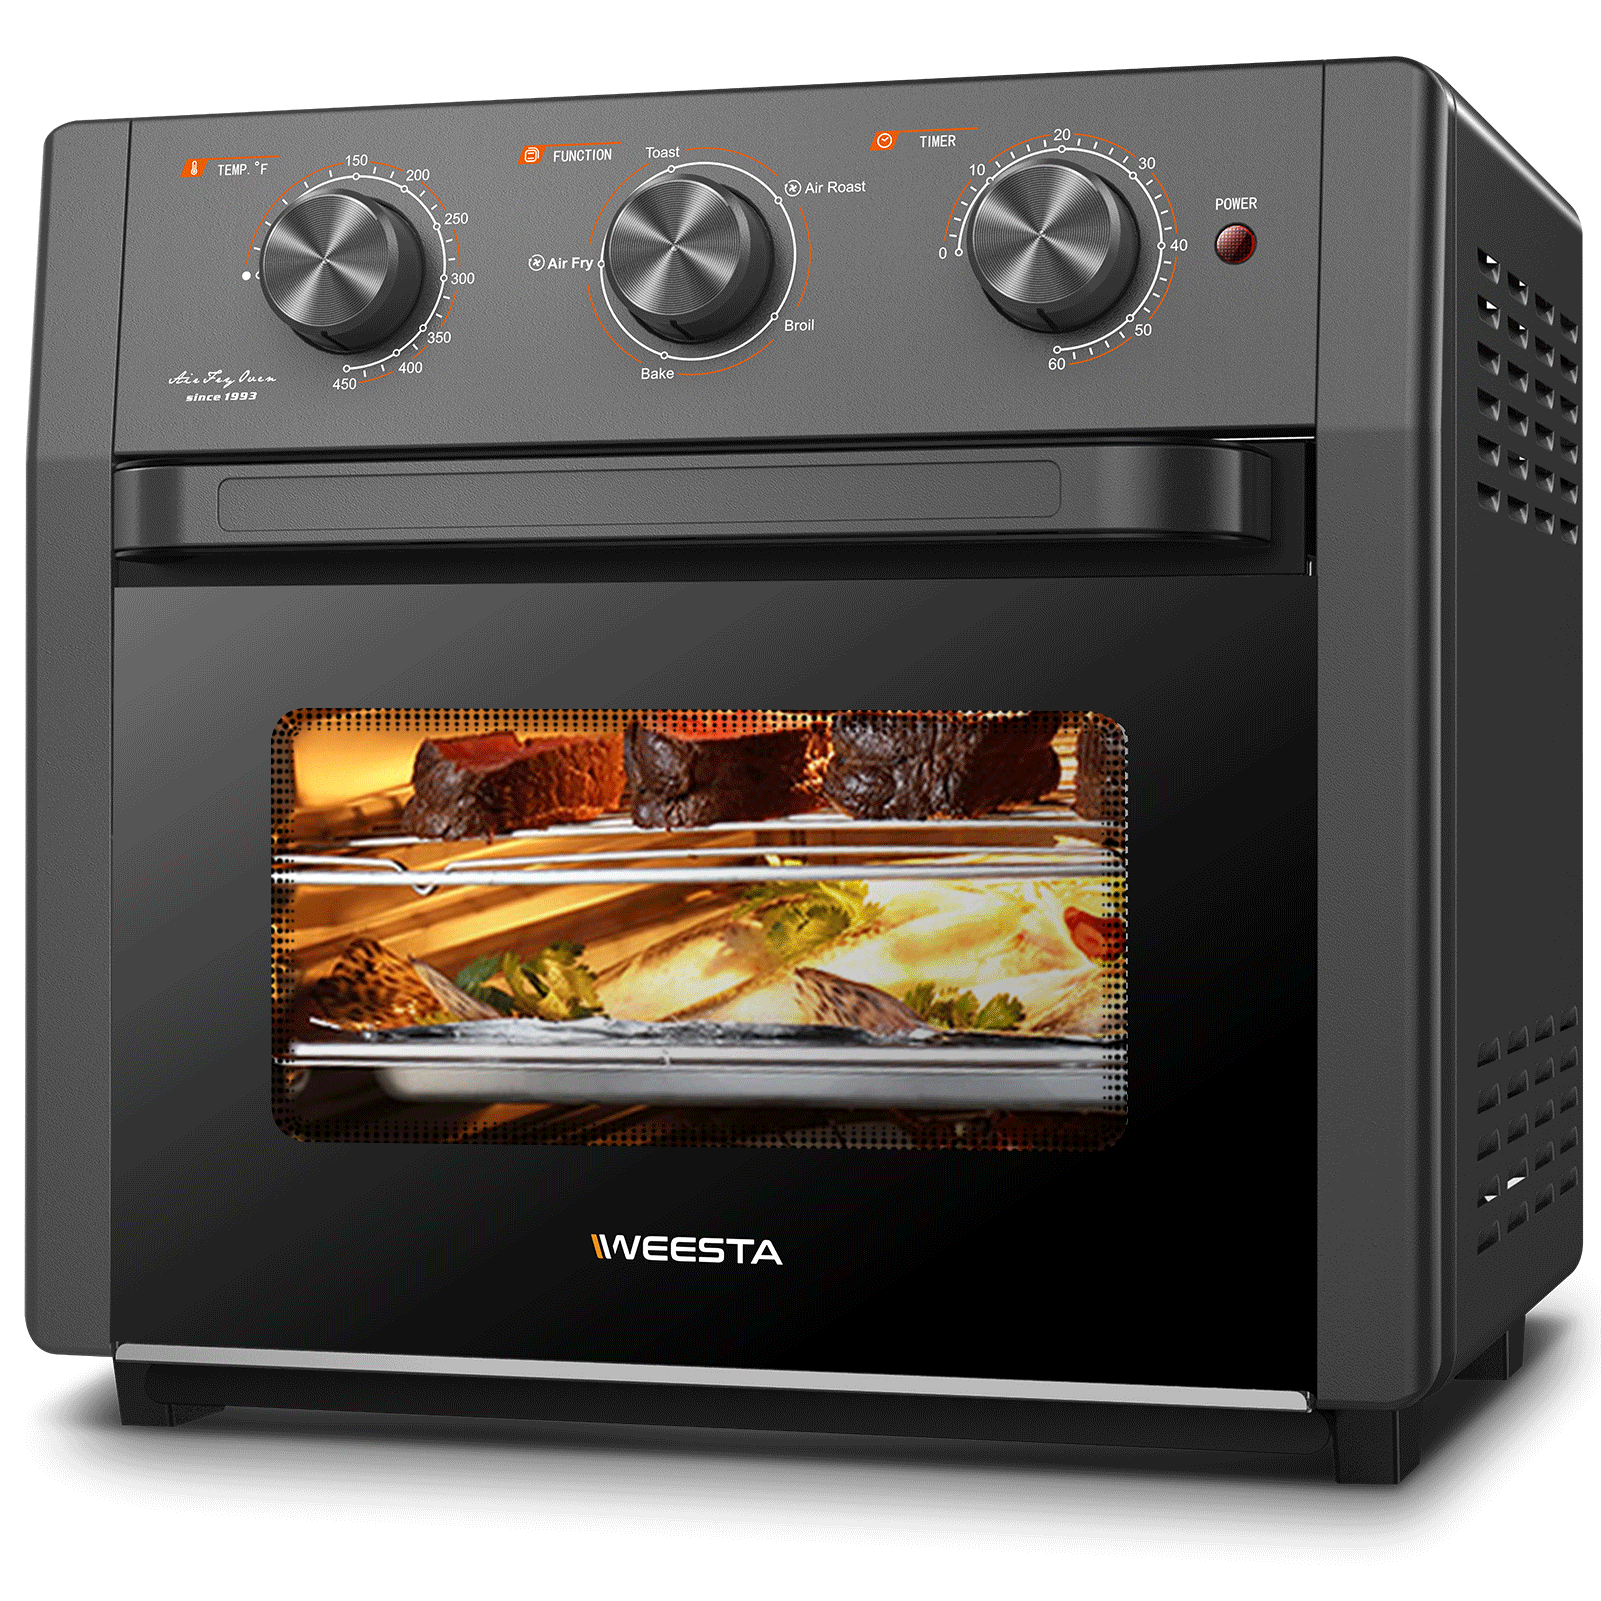 Large Capacity Countertop Oven with Air Fryer for Chicken 12-IN-1 Toaster Oven Combo 24L / 25QT Stainless Steel 1700W CIARRA CATOSEC01 Digital Convection Oven Countertop Pizza & Cookies